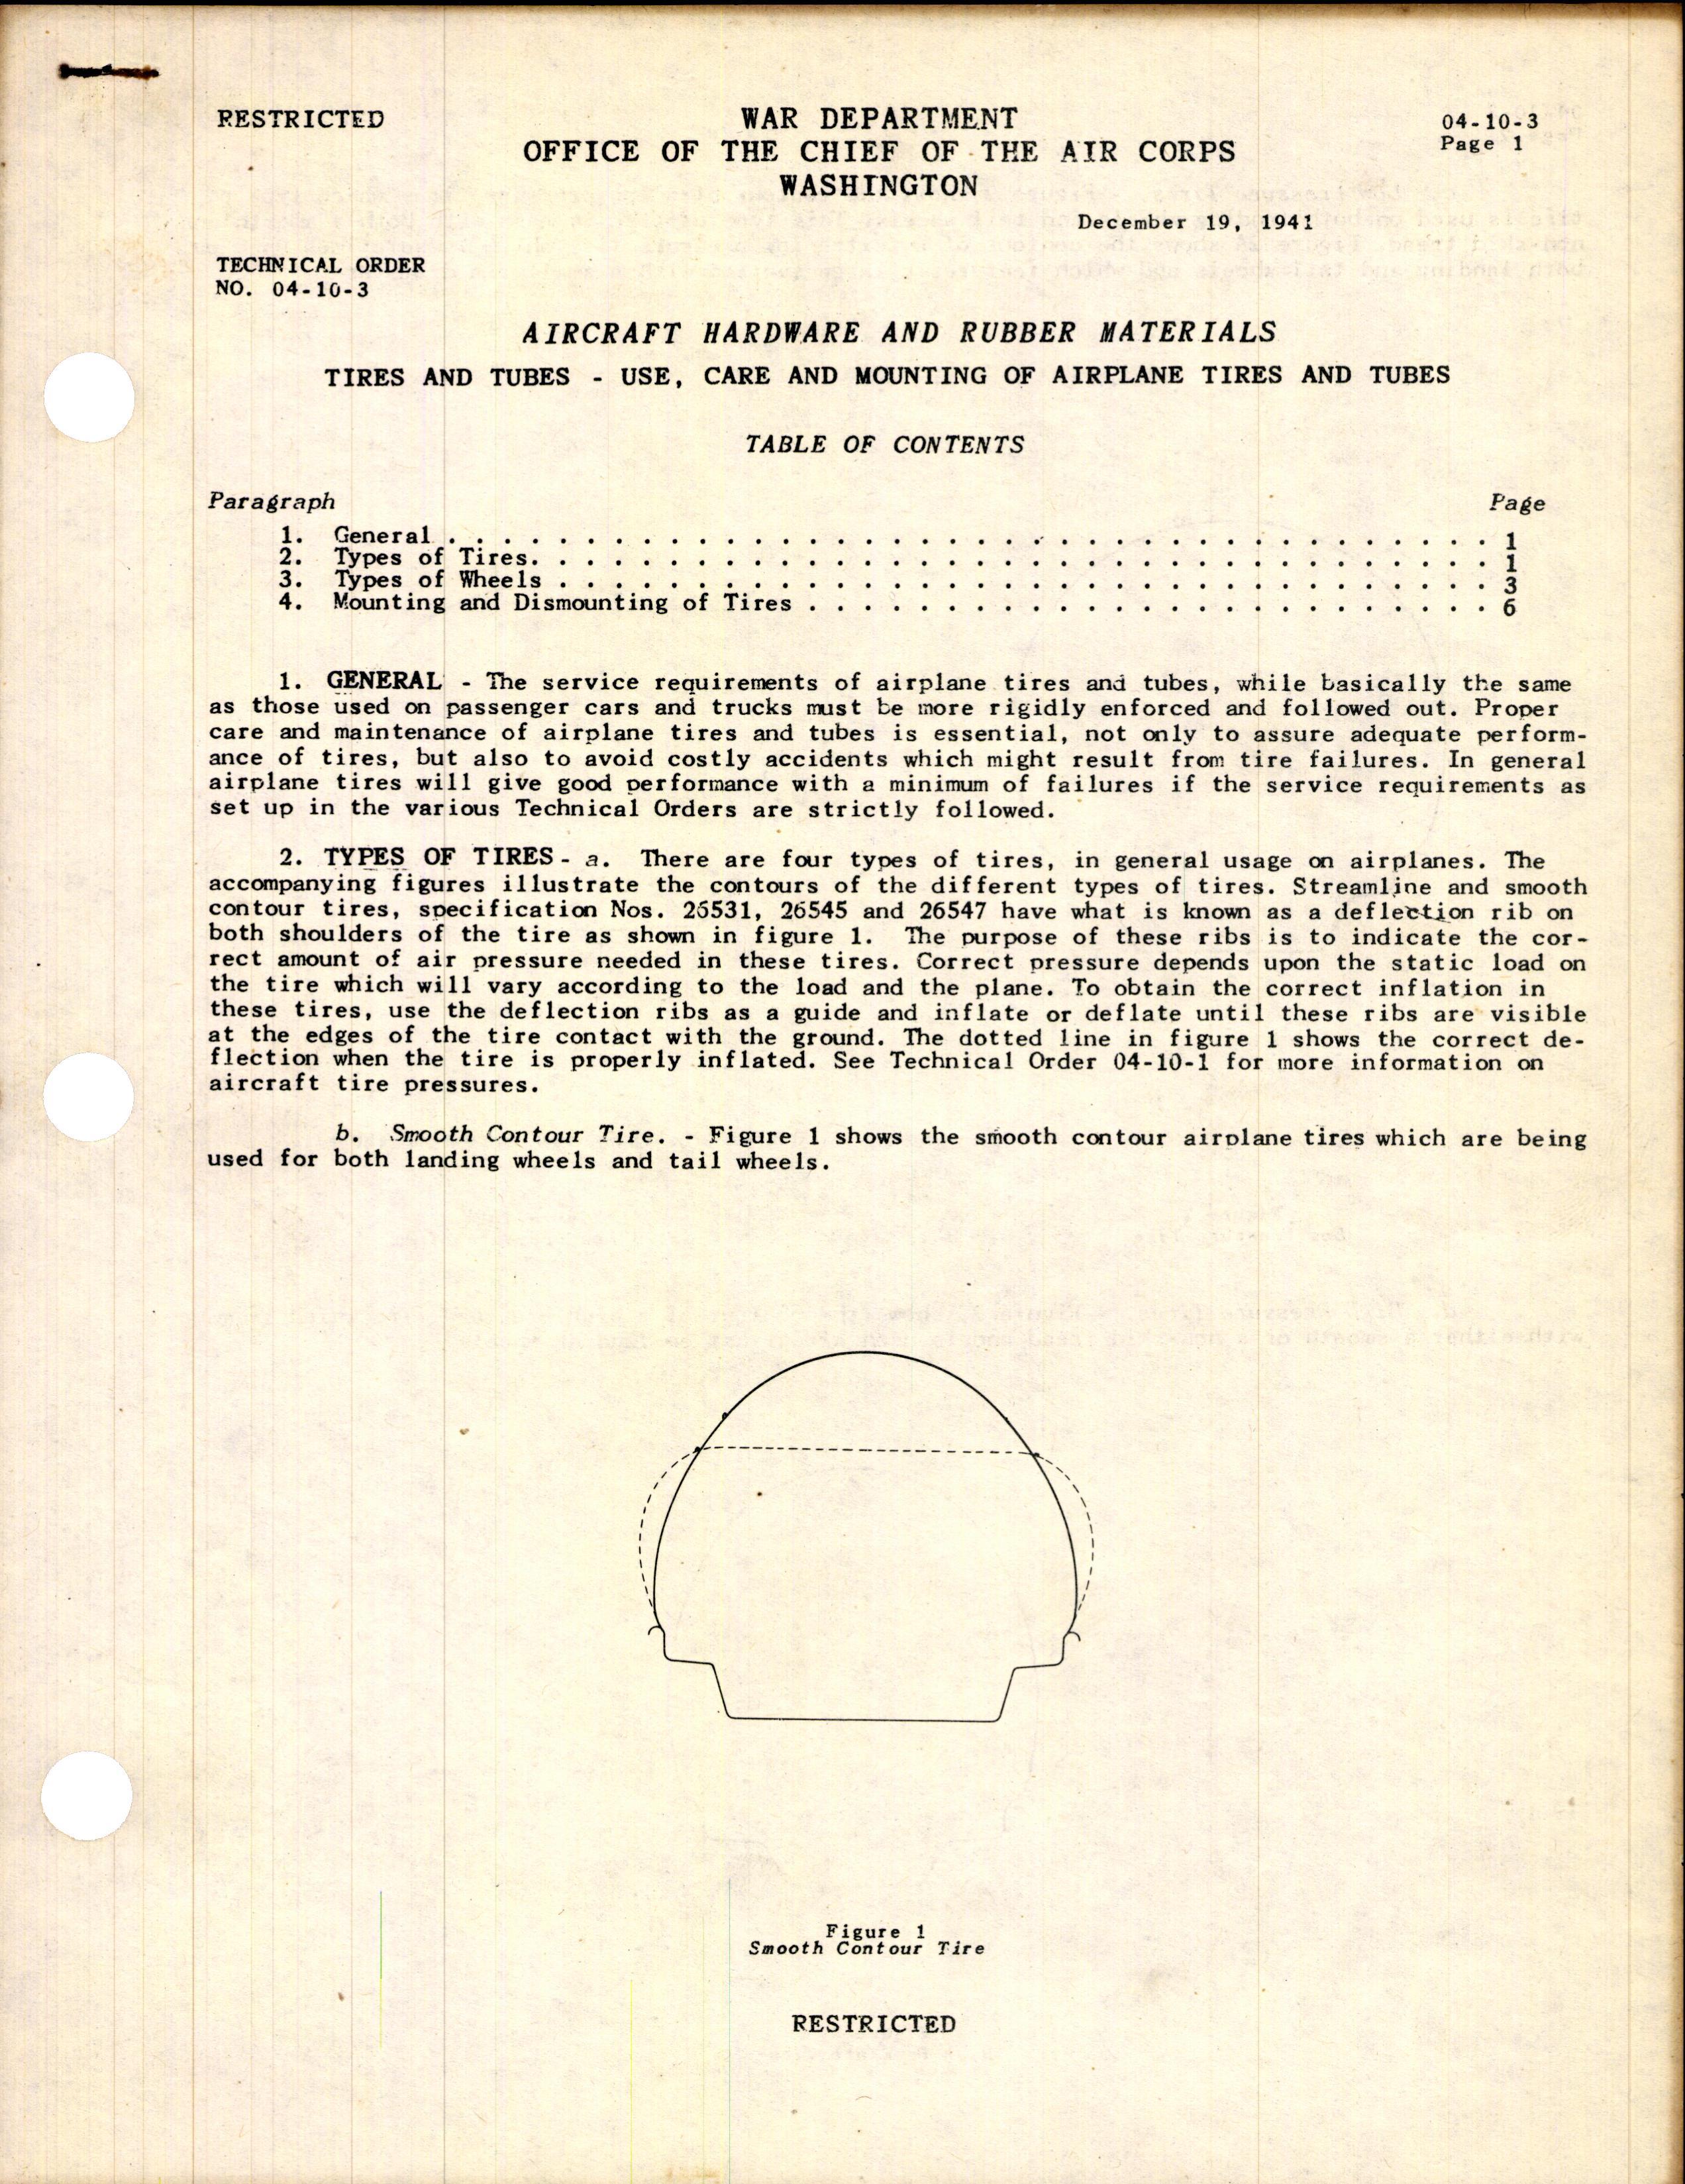 Sample page 1 from AirCorps Library document: Use, Care, and Mounting of Airplane Tires and Tubes